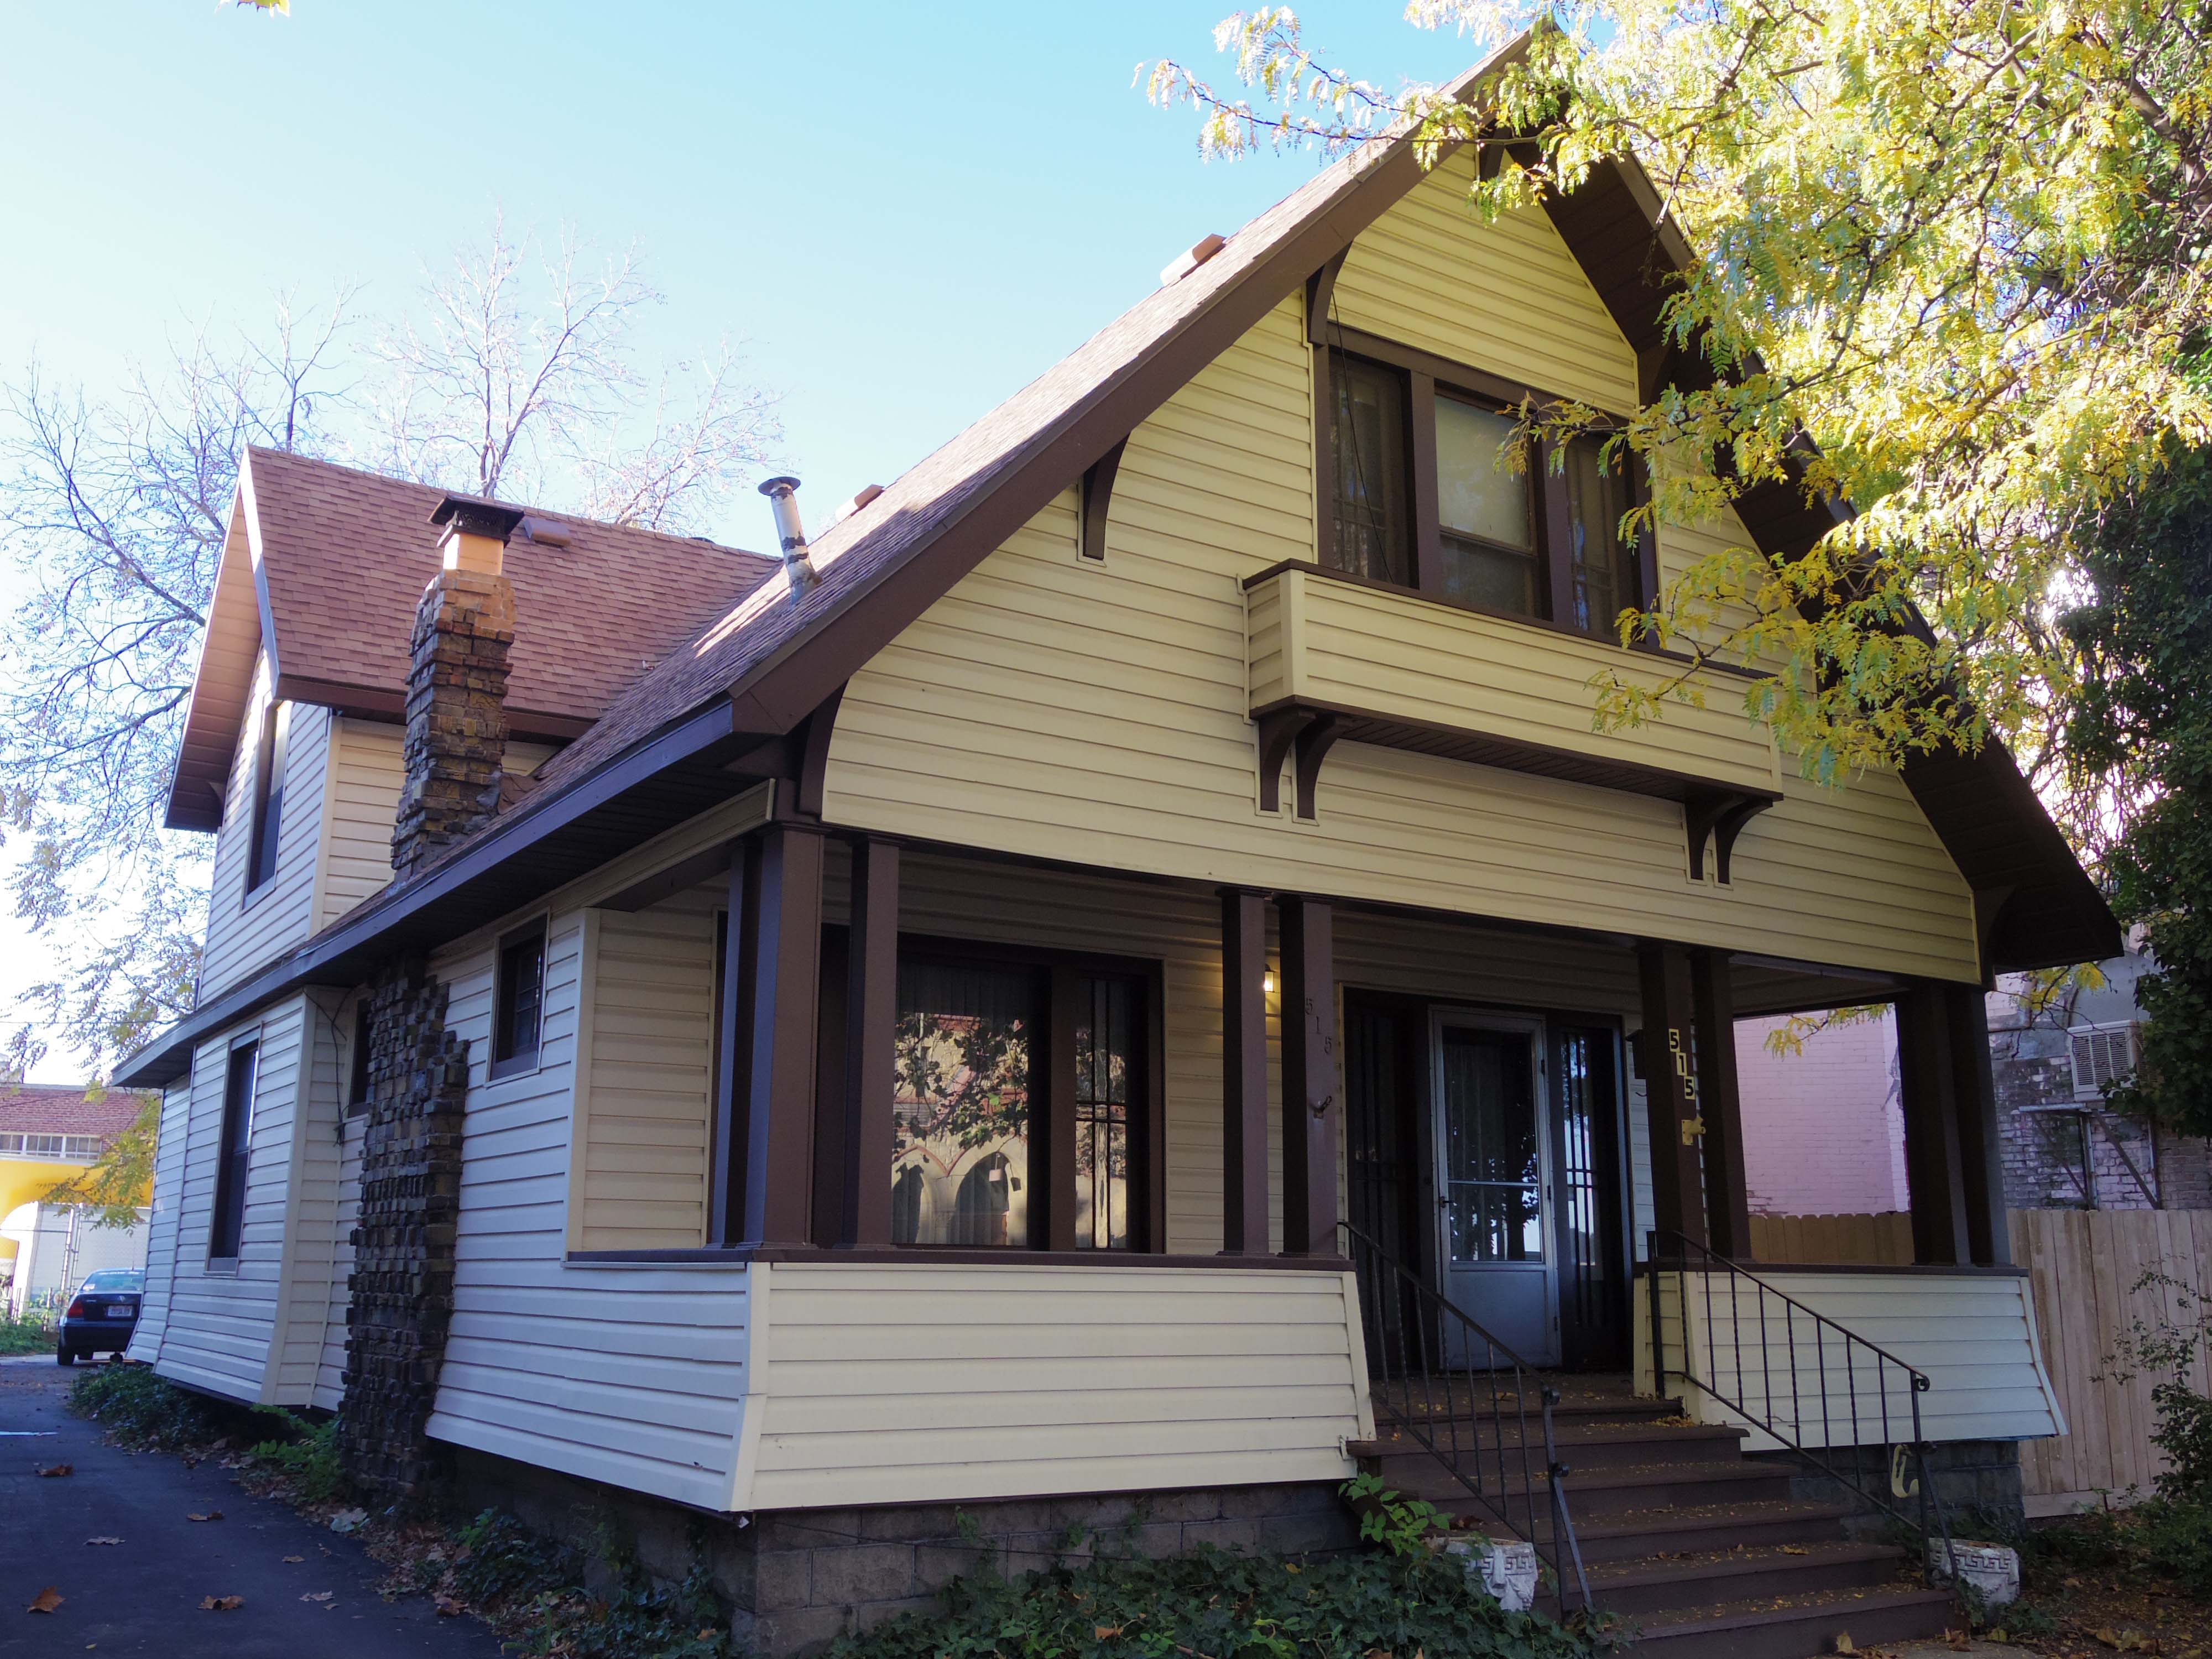 FOR SALE:  Historic Two-Story Craftsman Home